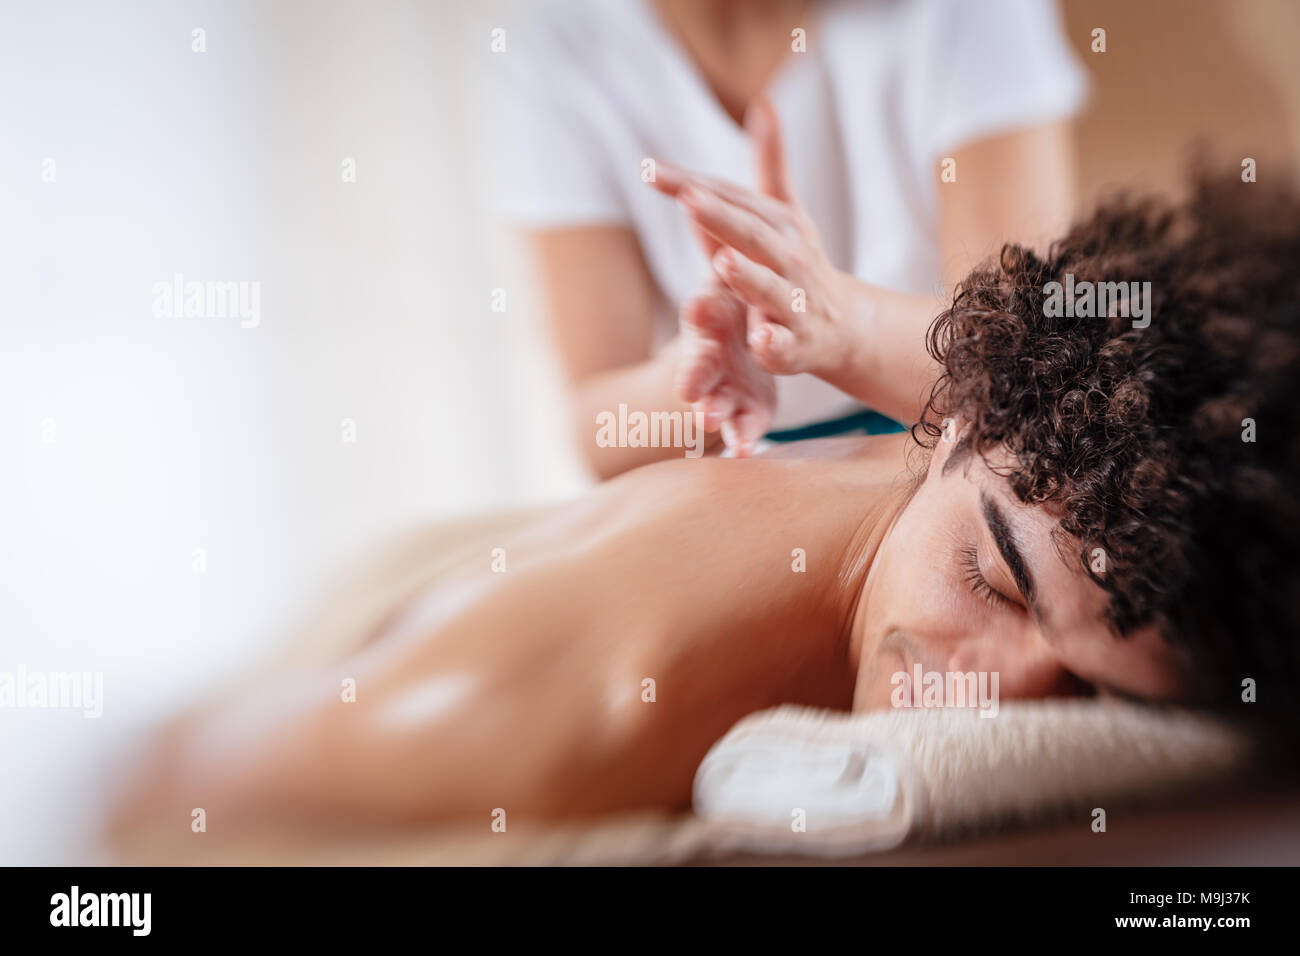 Close-up of a handsome healthy young man enjoying relaxing back massage at beauty salon. Selective focus. Stock Photo